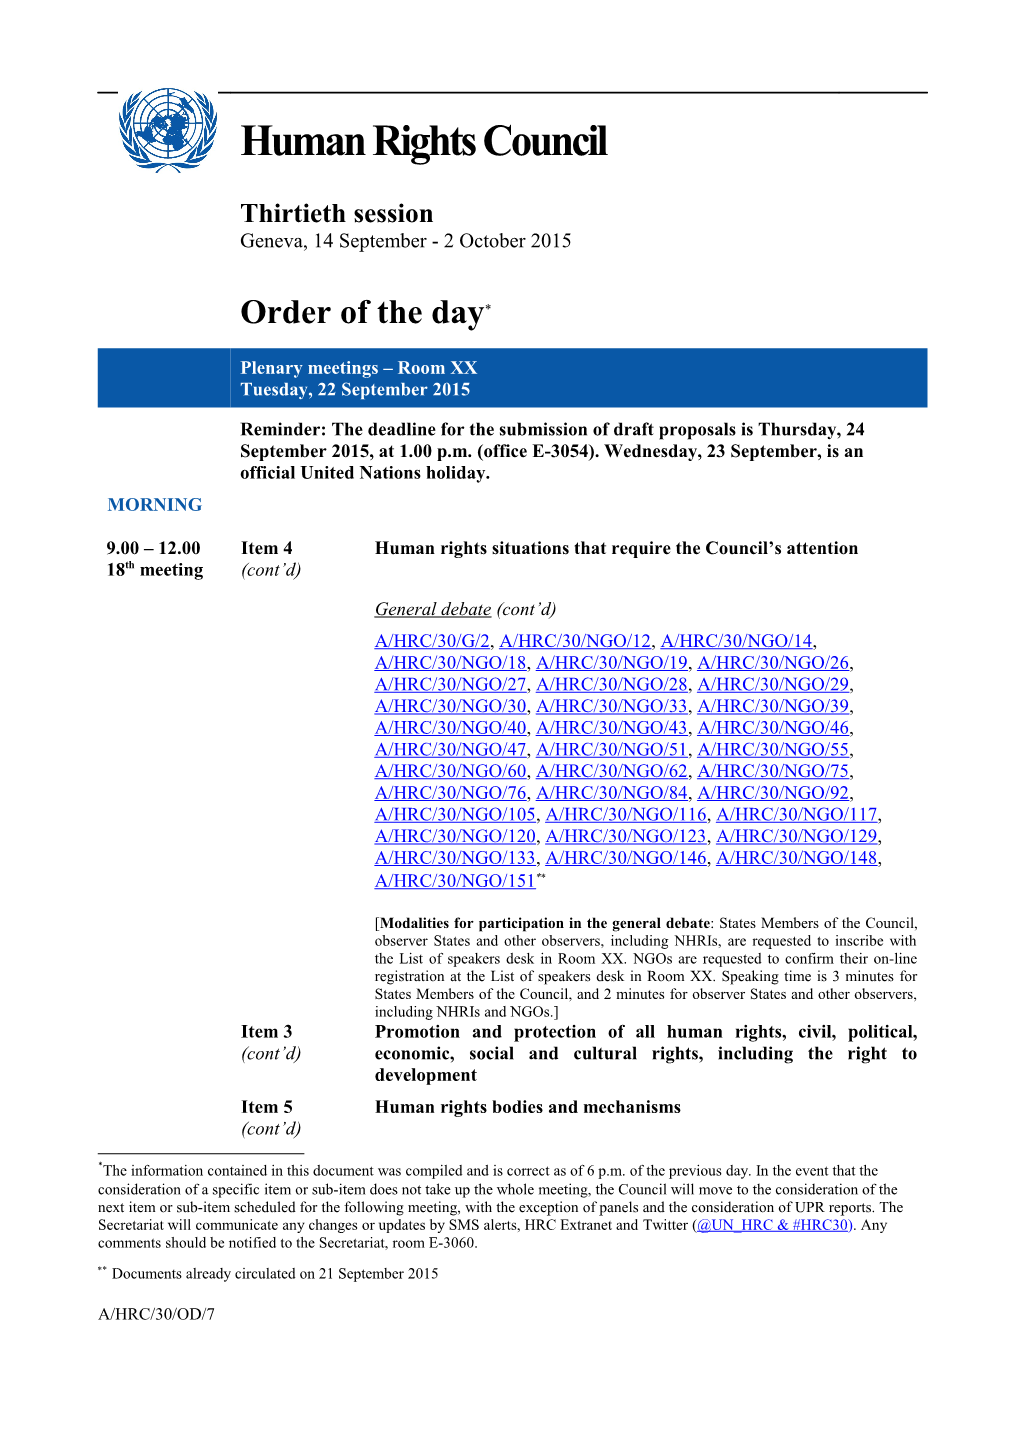 Tuesday, 22 September 2015, Order of the Day